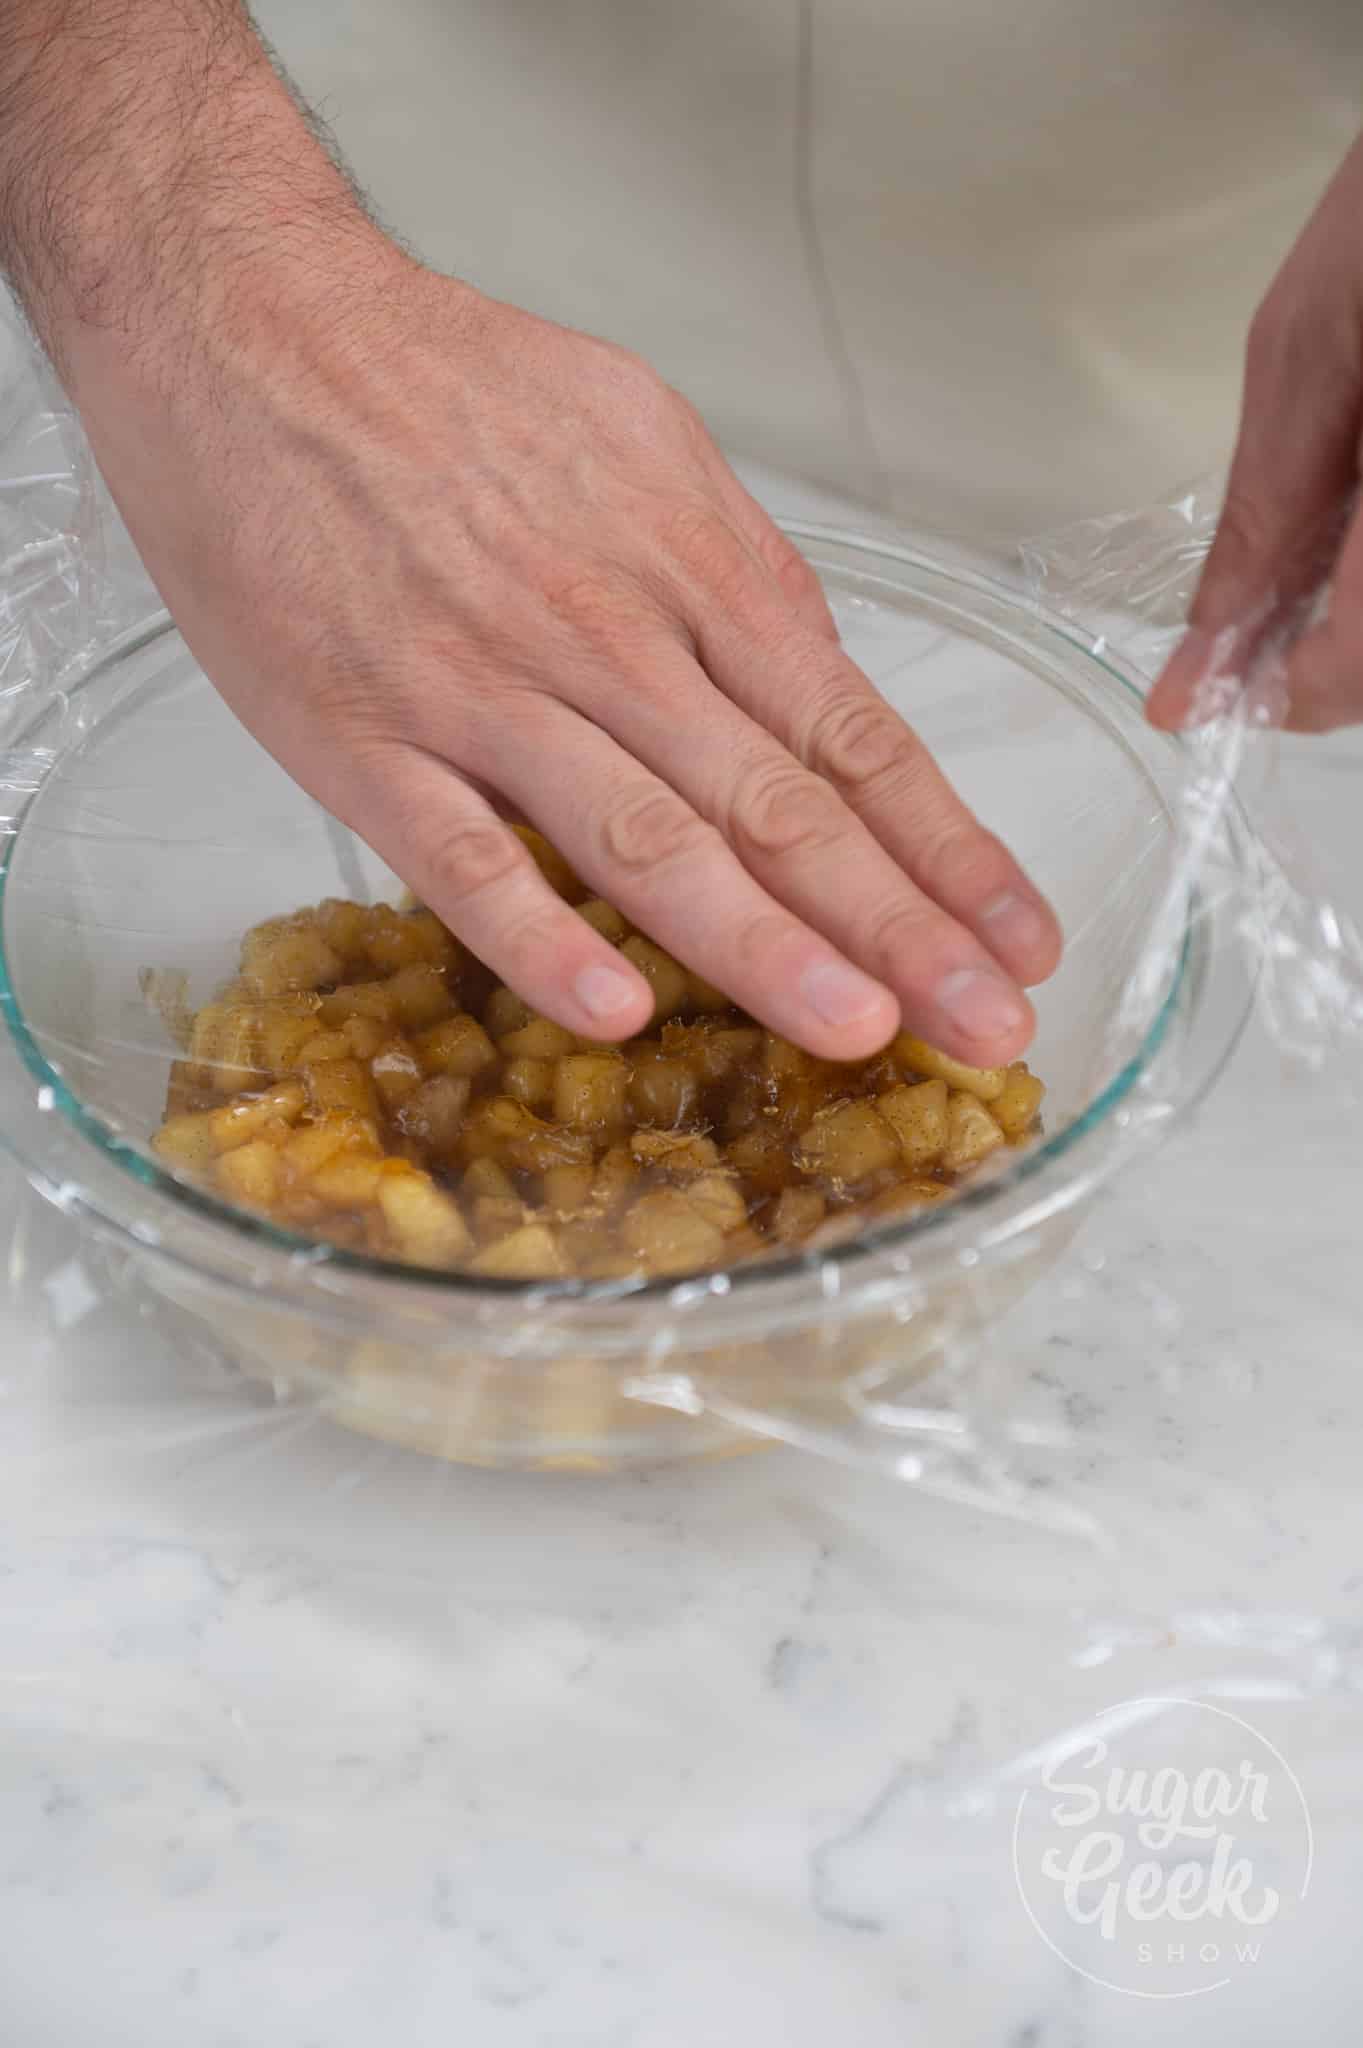 hand placing plastic wrap on top of filling.